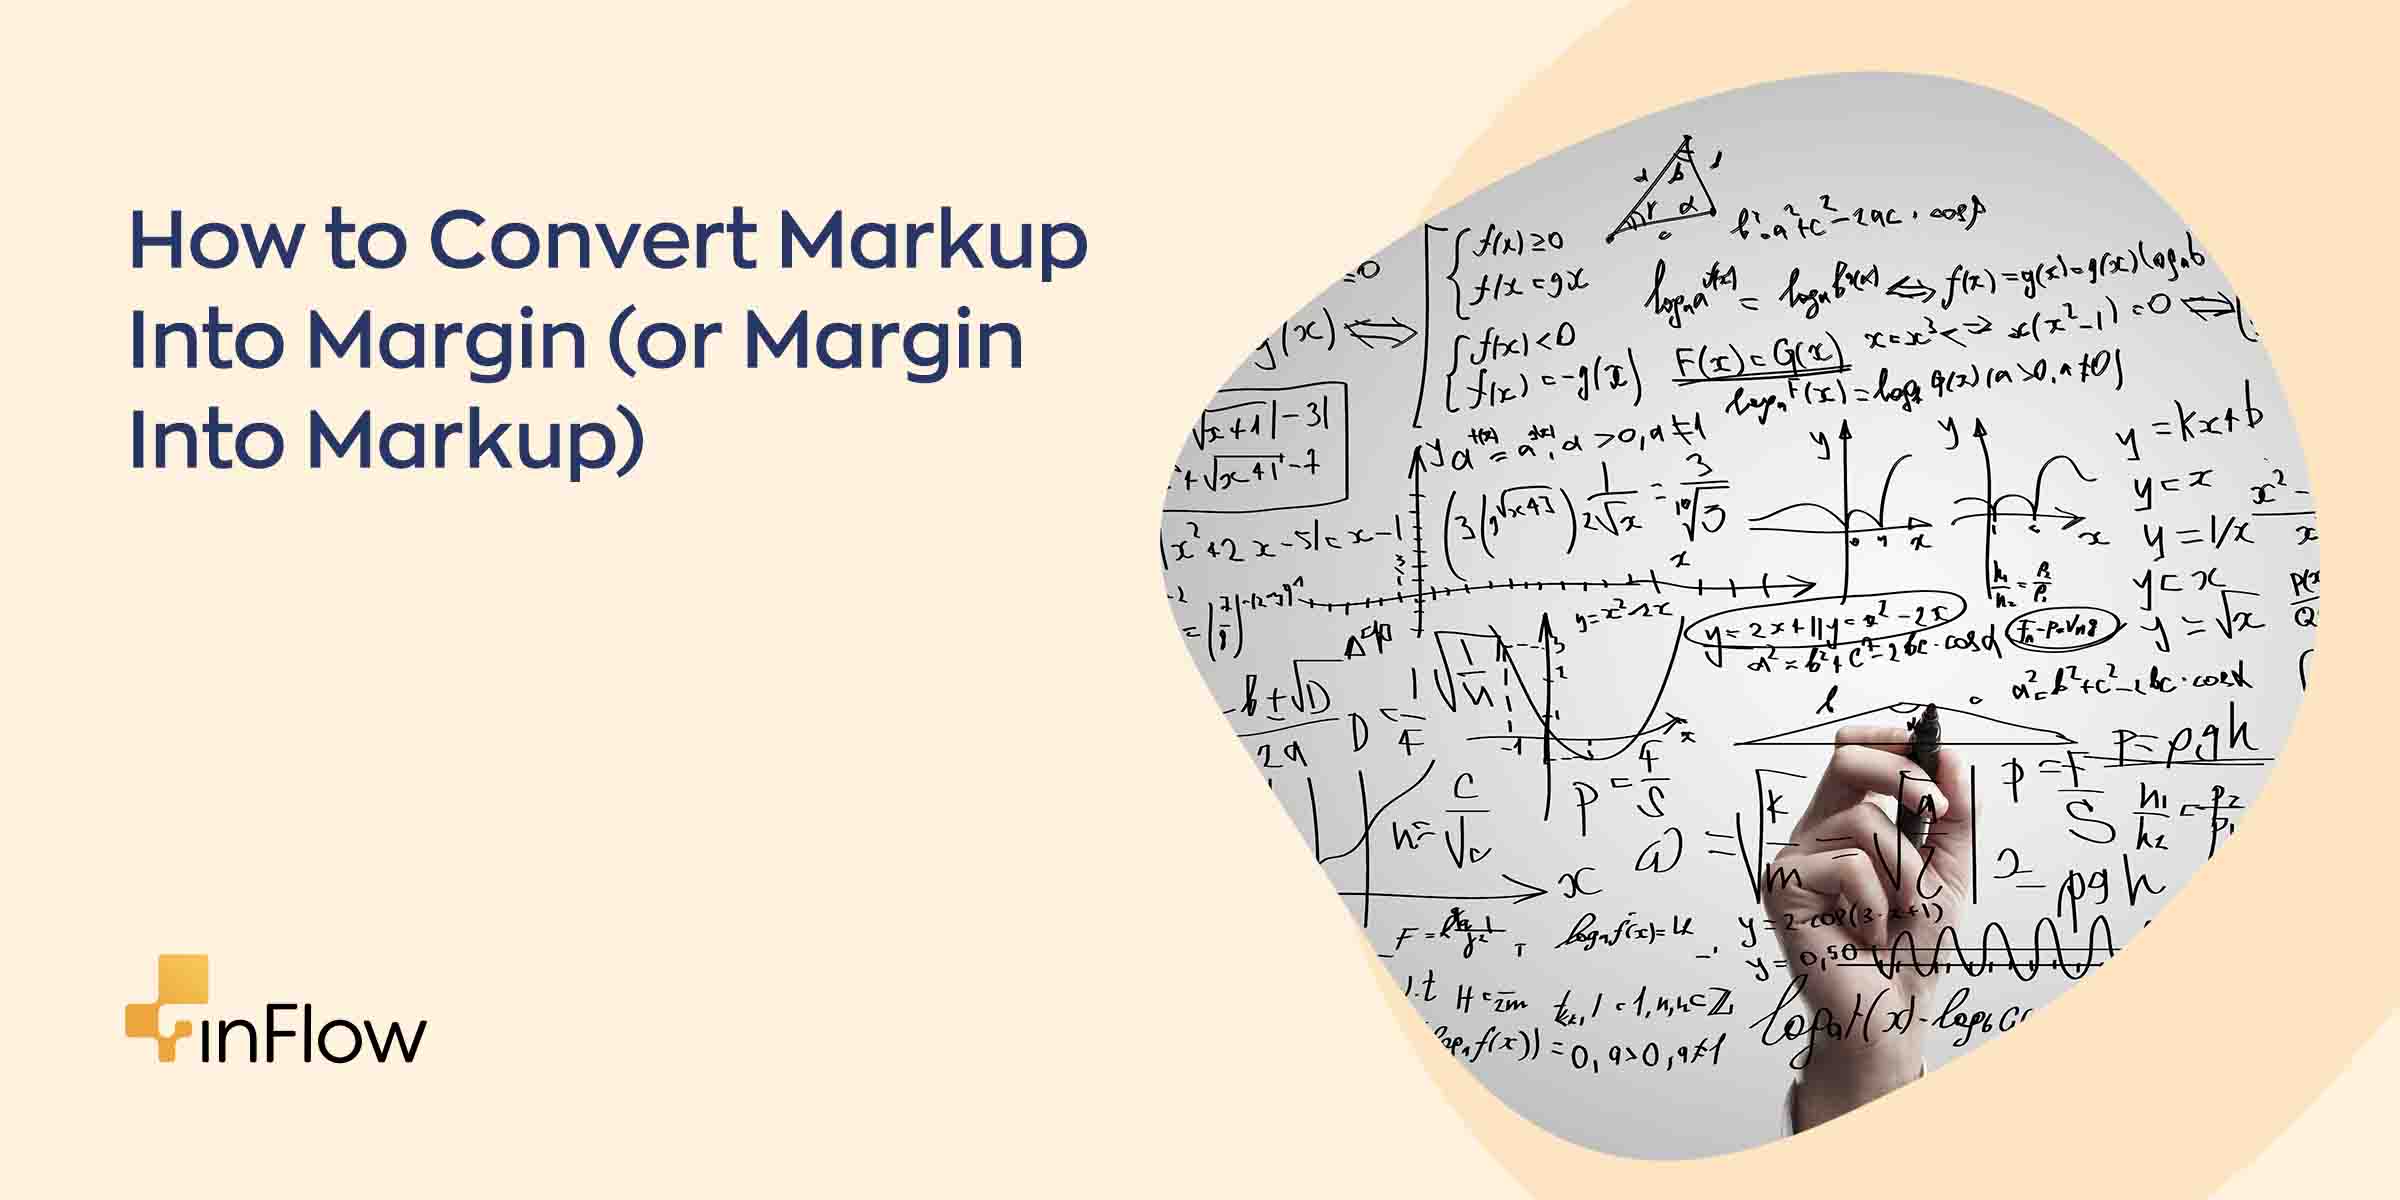 How to Convert Markup Into Margin (or Margin Into Markup)